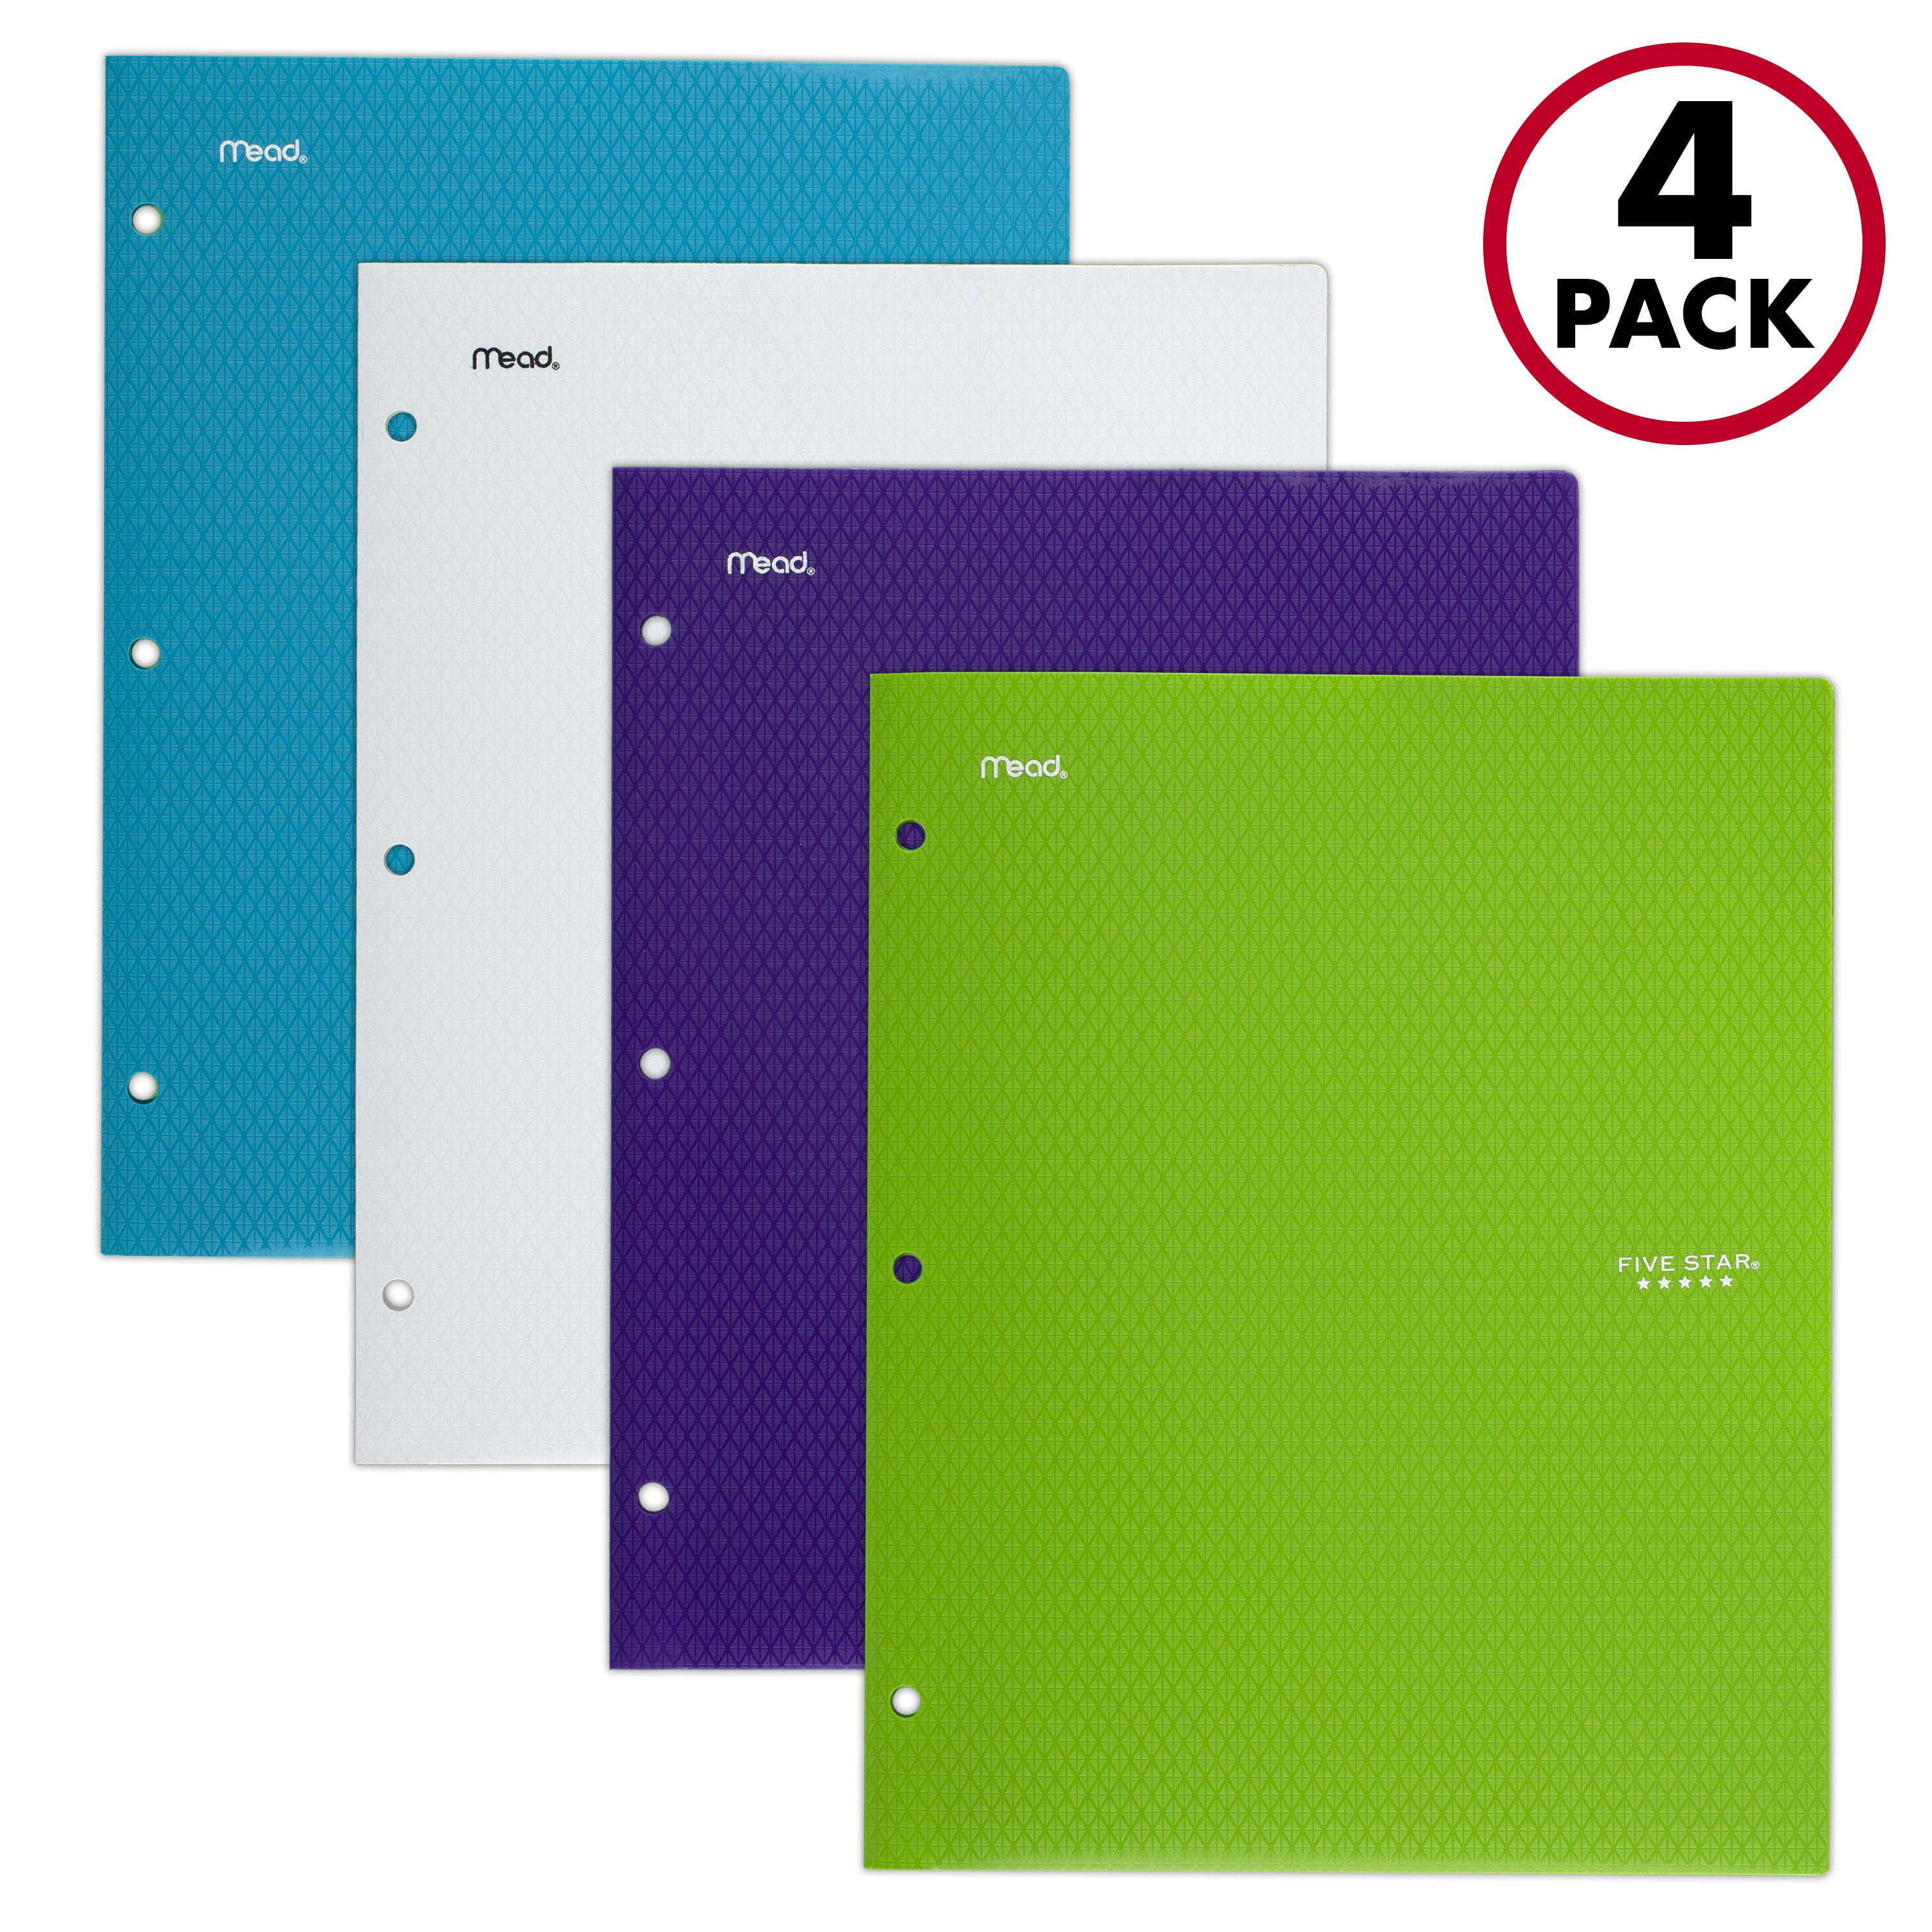 Mead FIVE STAR Plastic Folders 2-Pocket 3-Prong ASSORTED COLORS 8-Pack NEW 